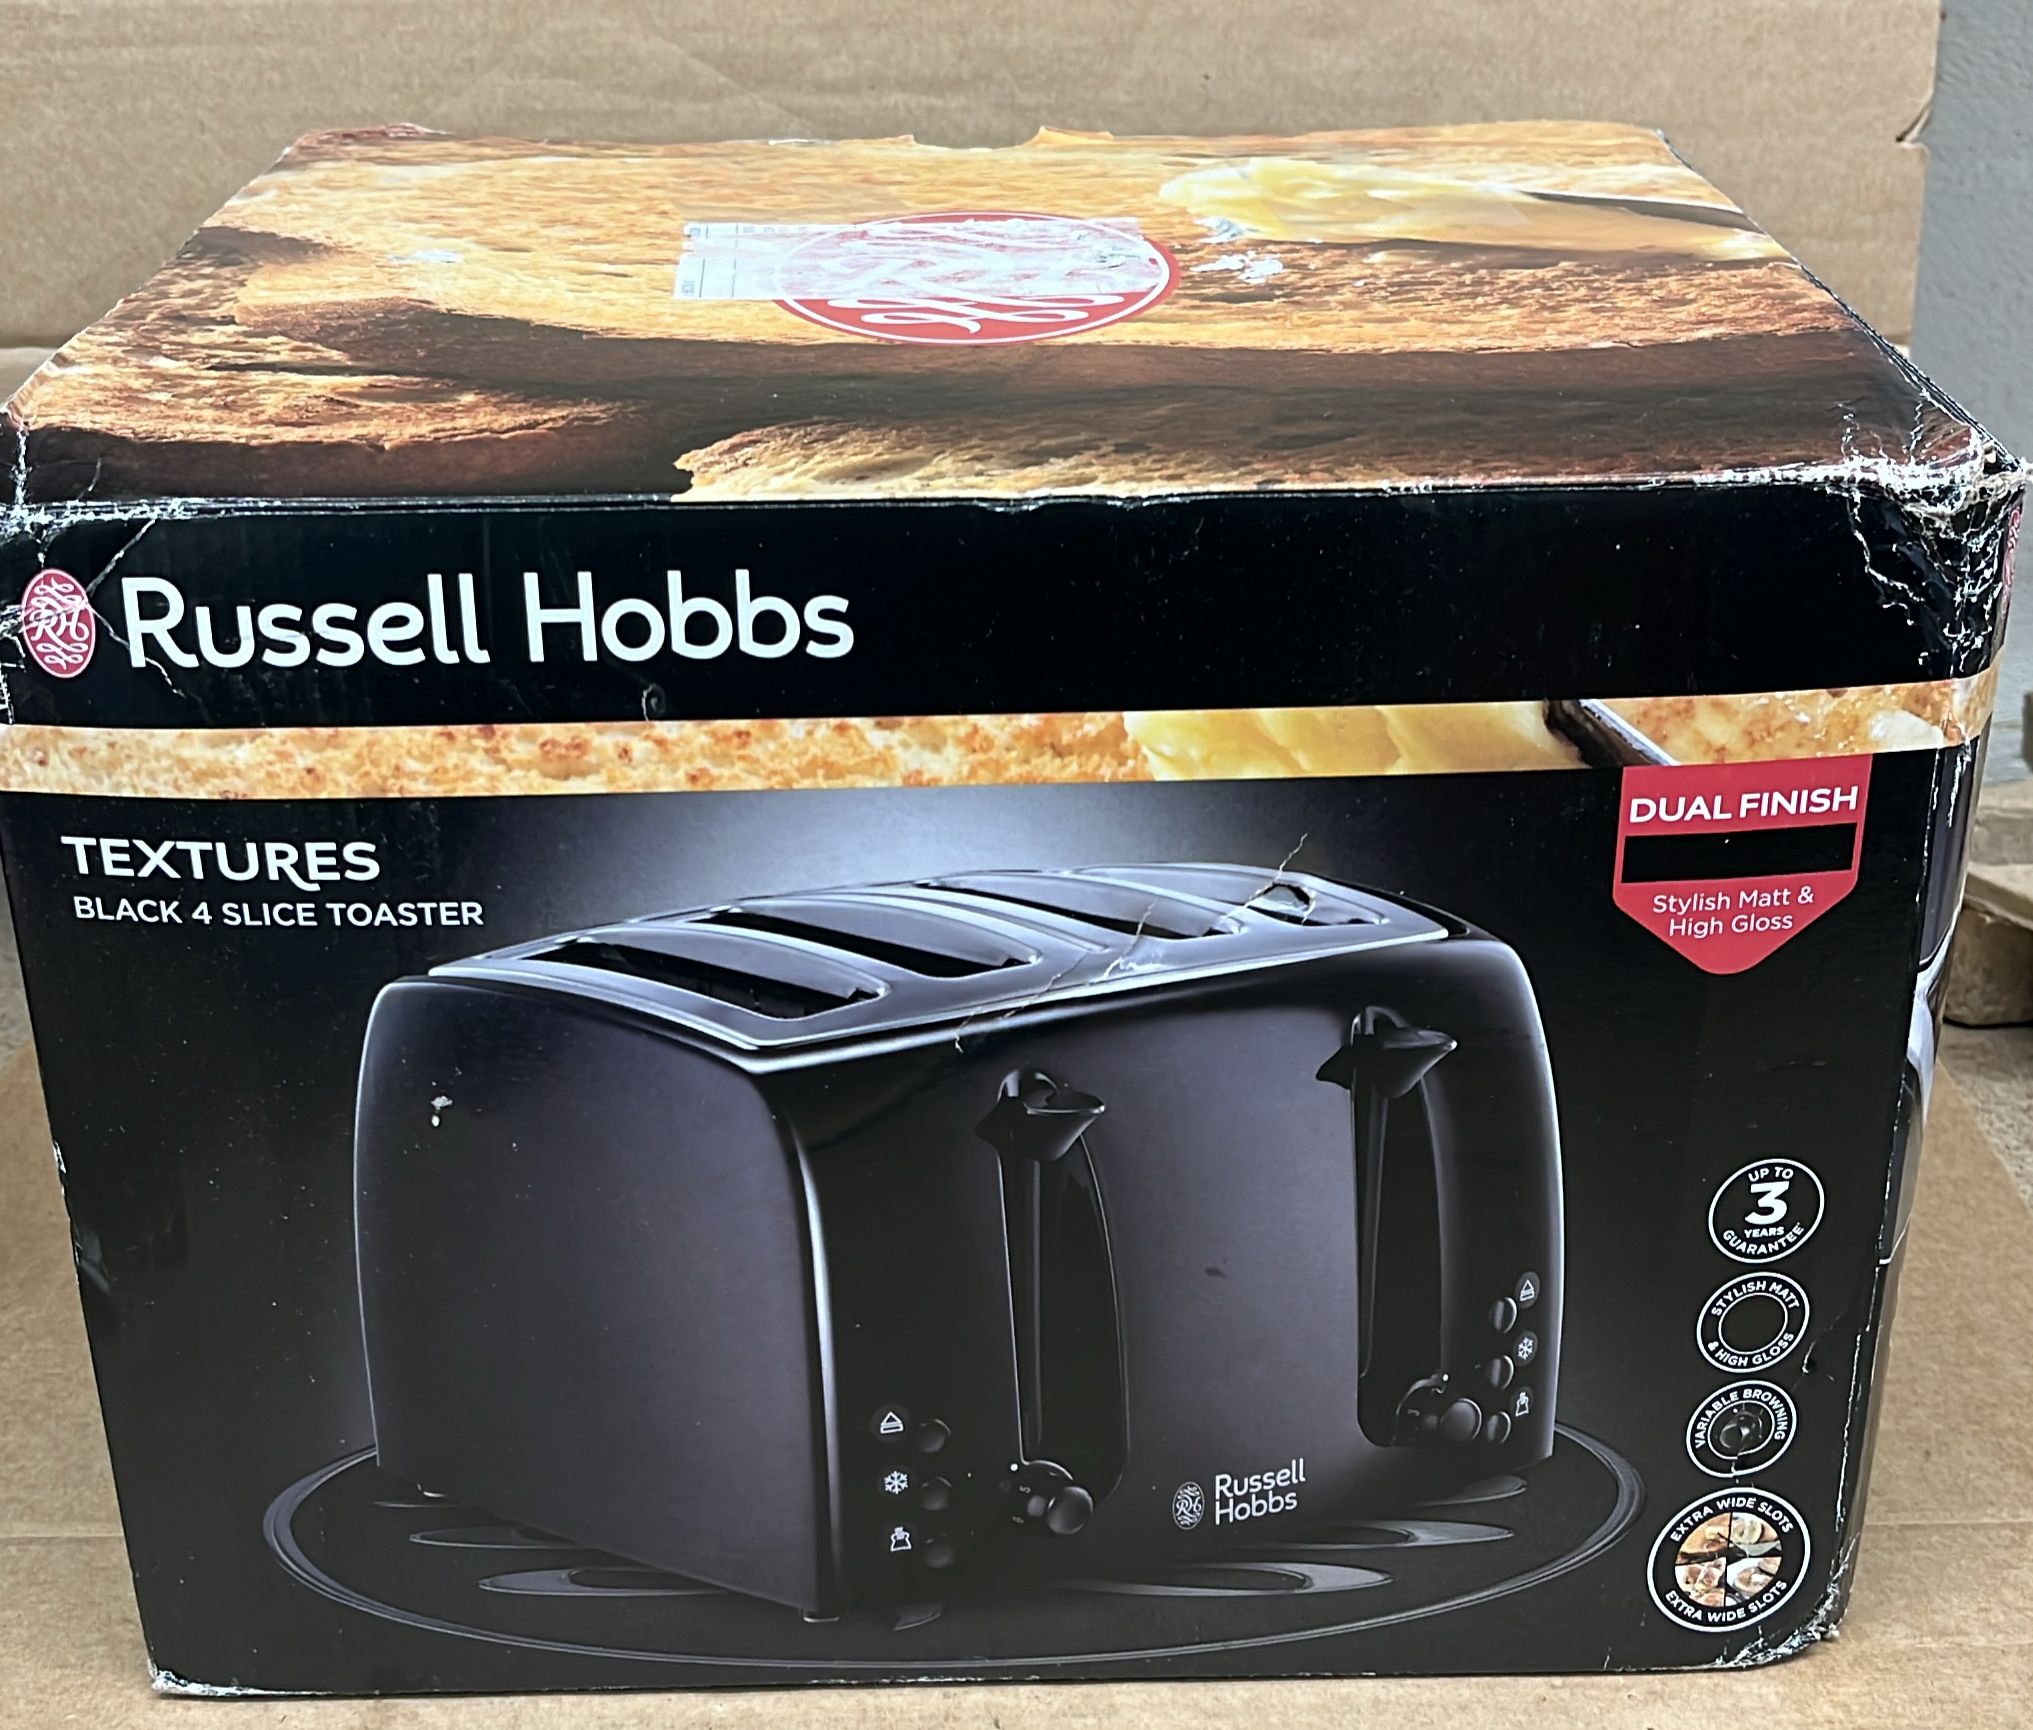 Russell Hobbs 21651 Textures 4-Slice Toaster, Black-A5469